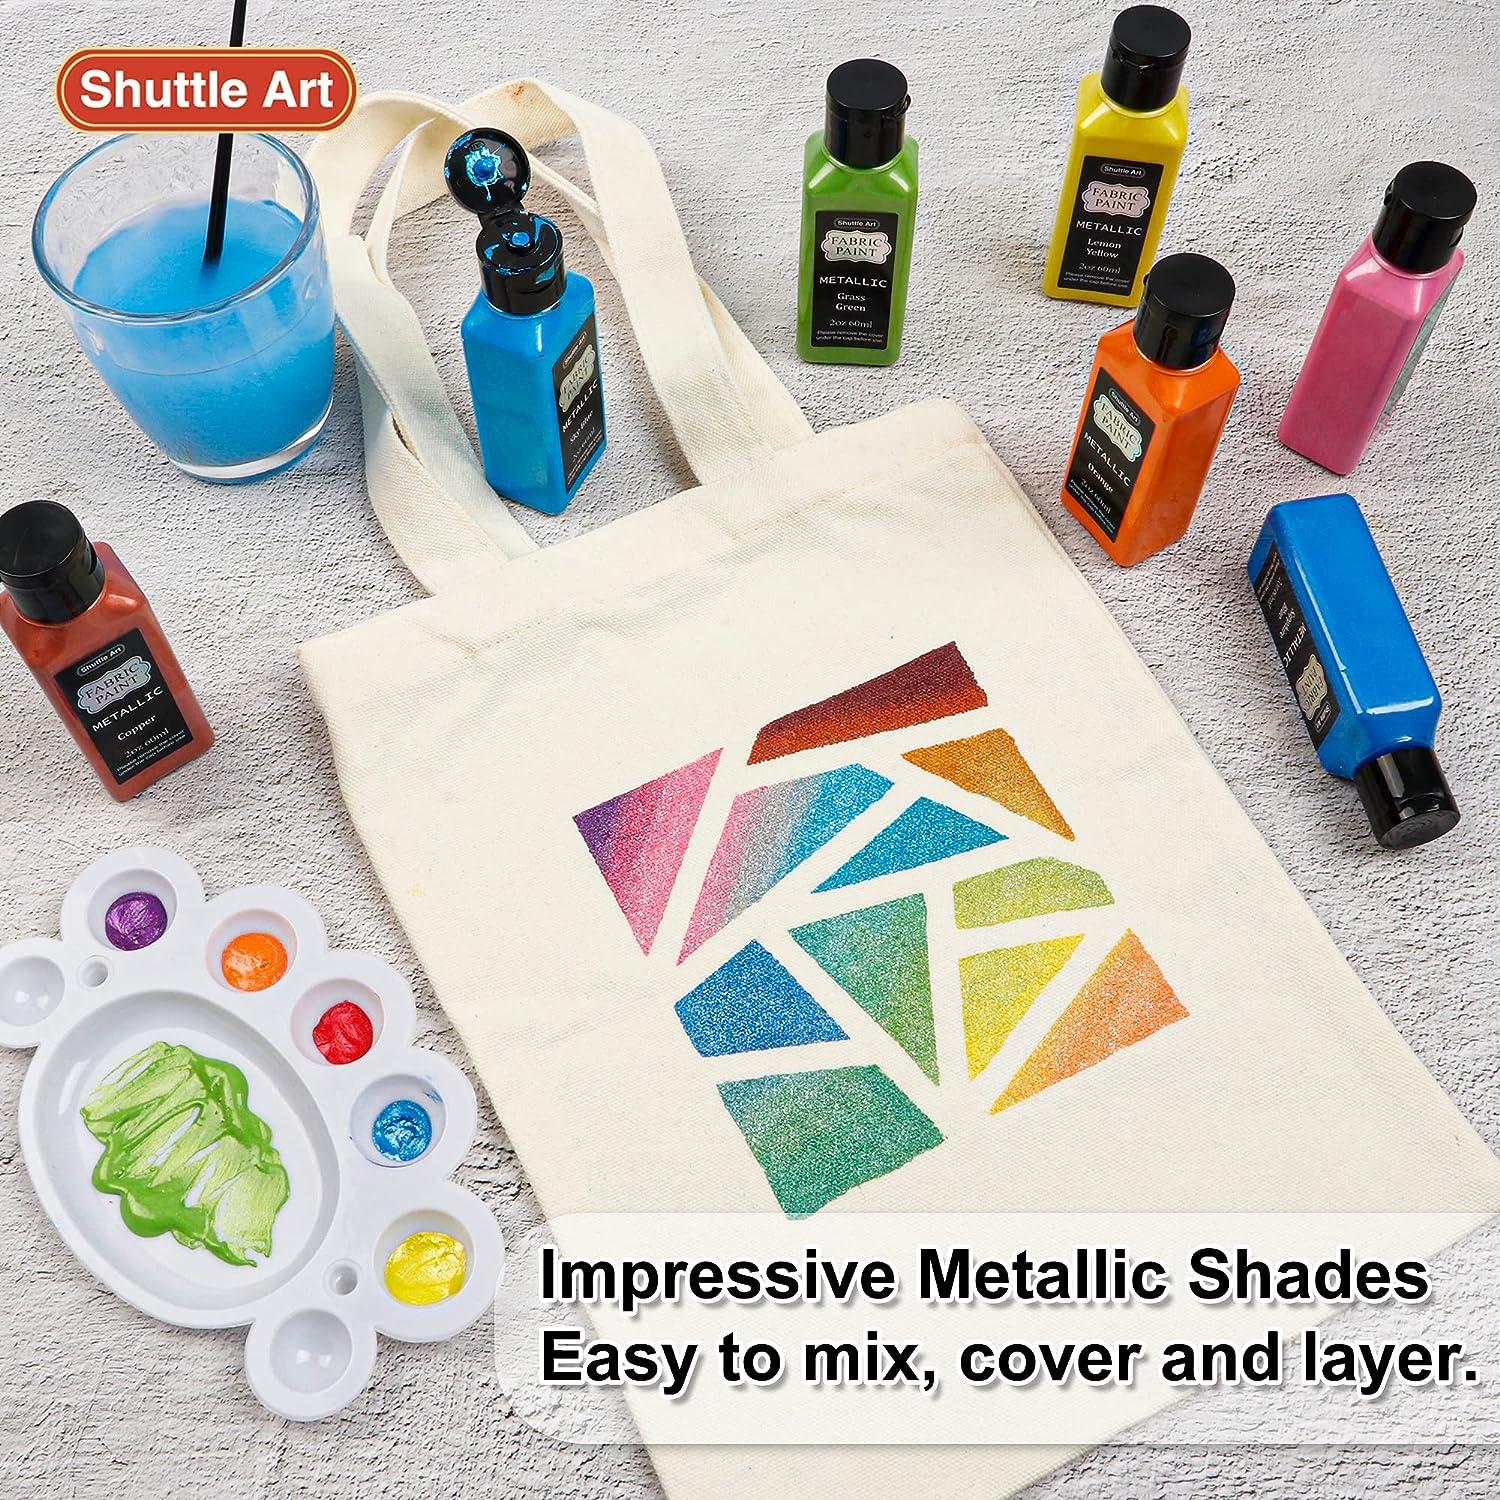 Metallic Fabric Paint, Shuttle Art 18 Metallic Colors Permanent Soft Fabric Paint in Bottles (60ml/2oz) with Brush and Stencils, Non-Toxic Textile